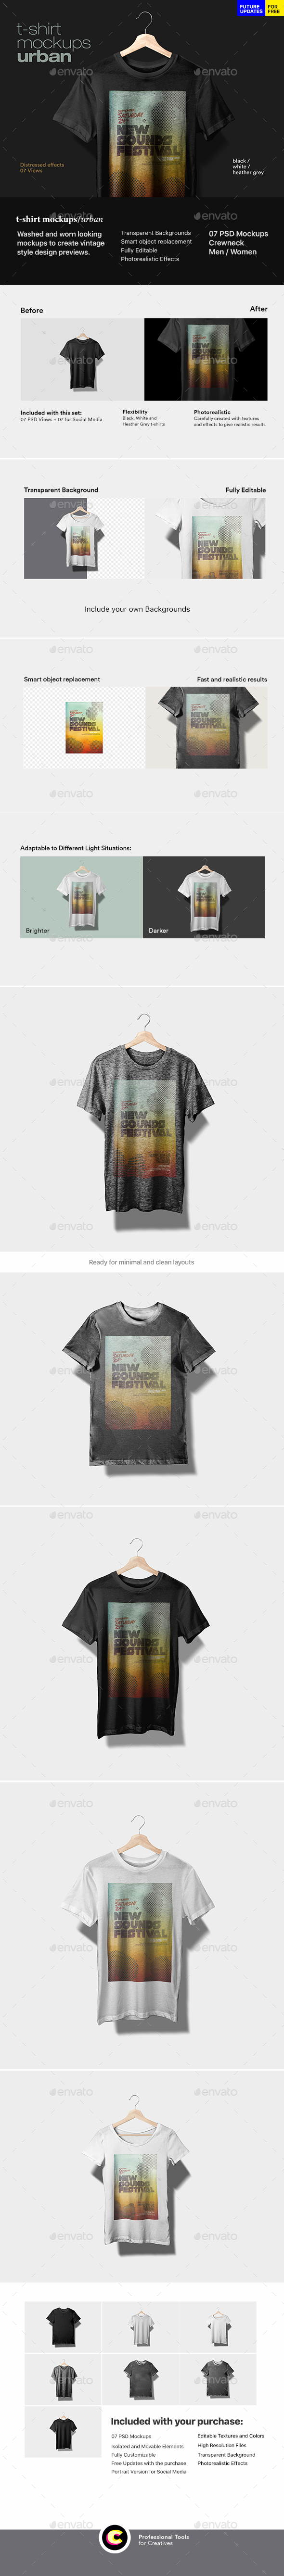 Download T Shirt Mockup Urban By Itscroma Graphicriver